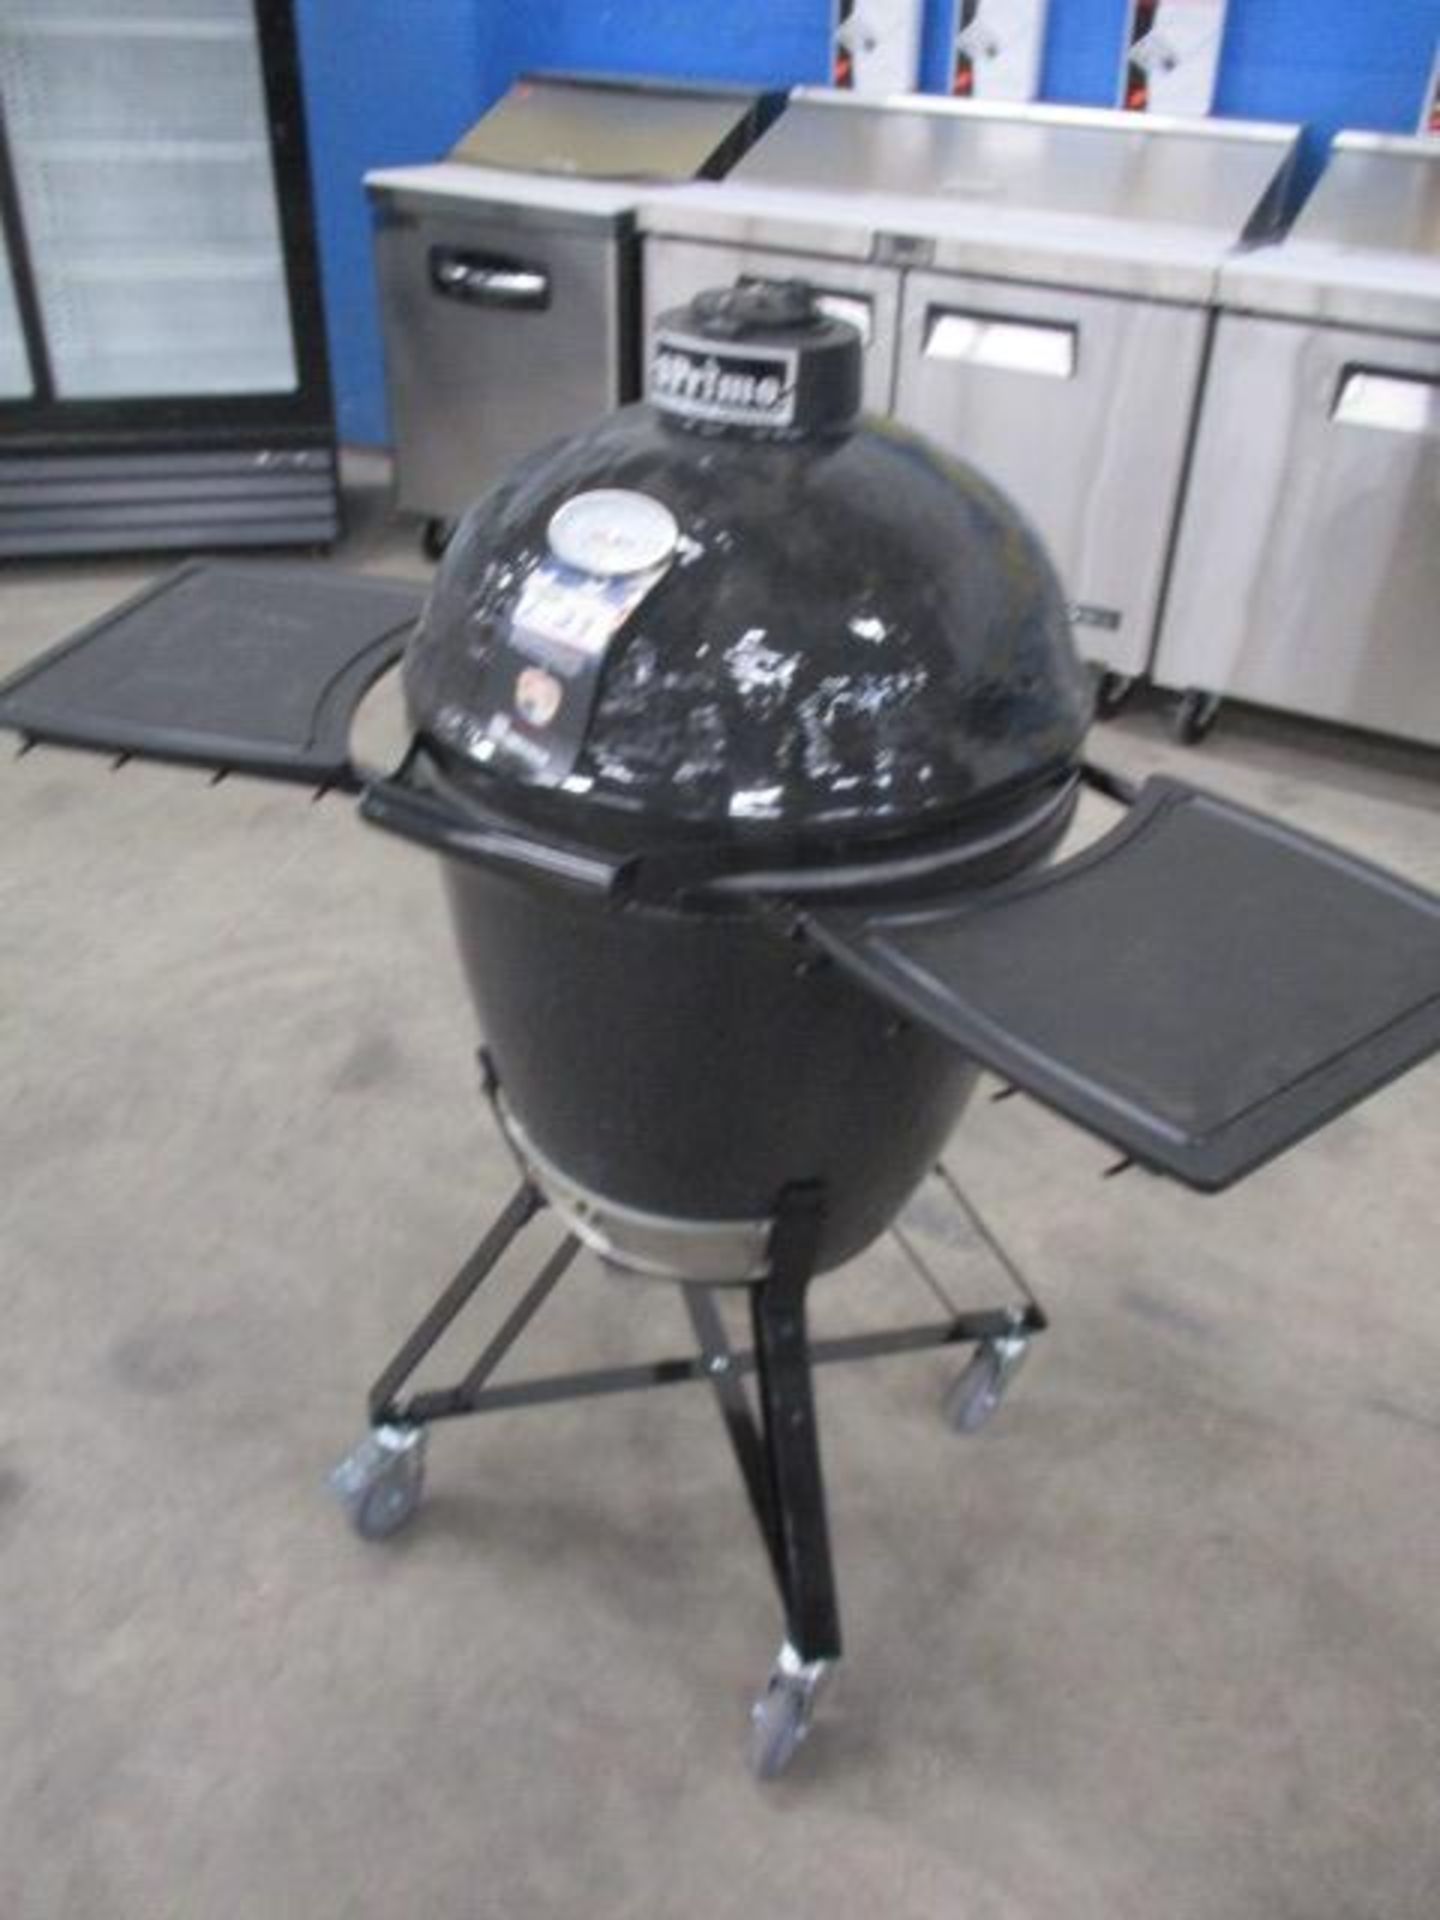 * New Primo Ceramic BBQ/Smoker with Accessoires and Charcoal, with warranty - Image 2 of 3